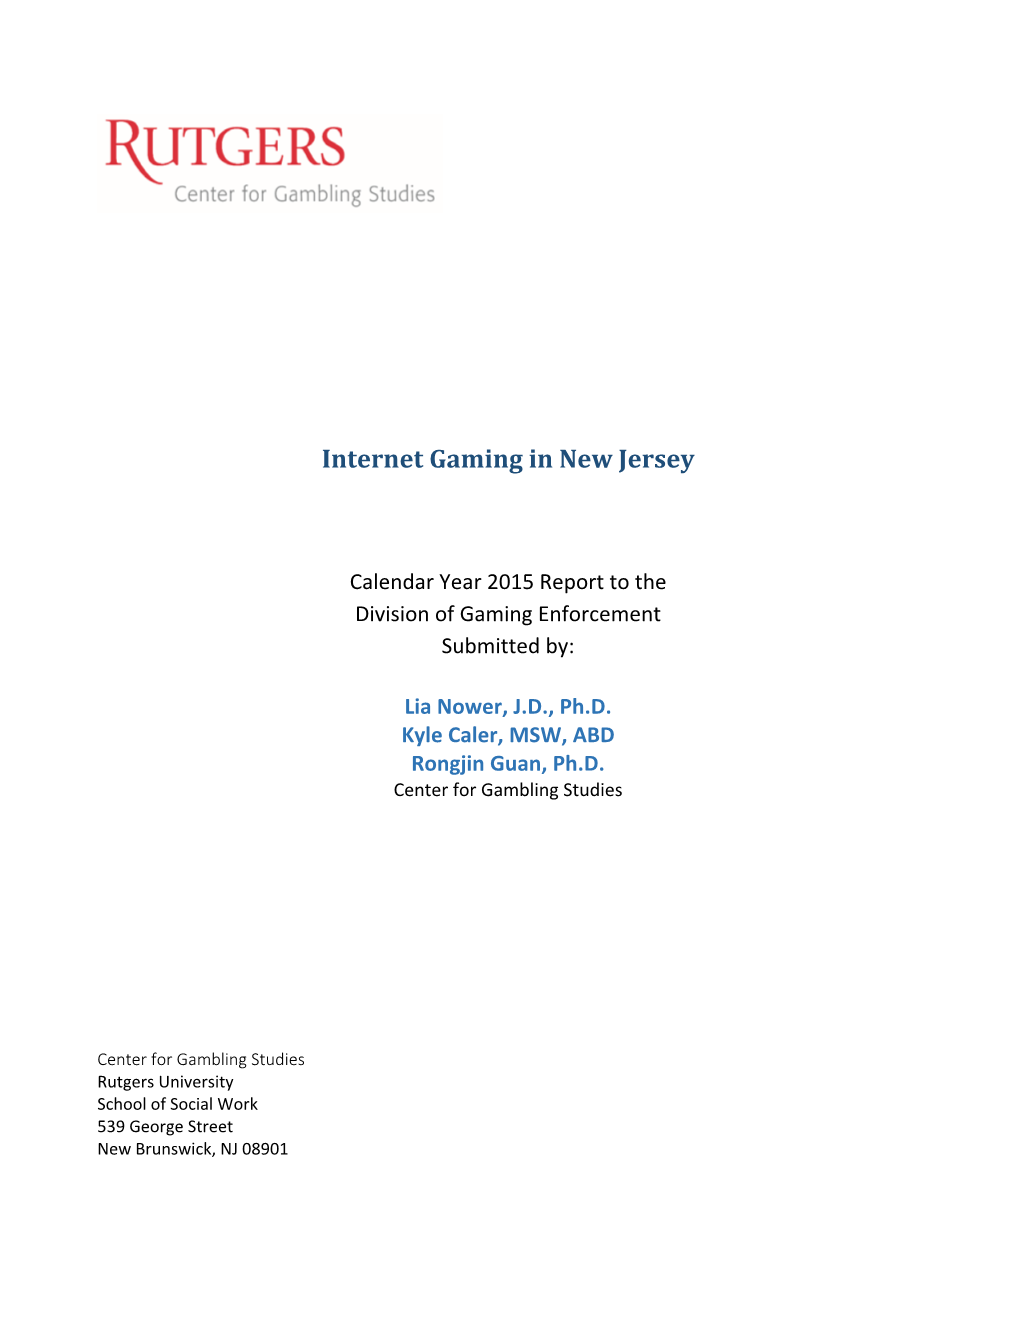 Internet Gaming in New Jersey